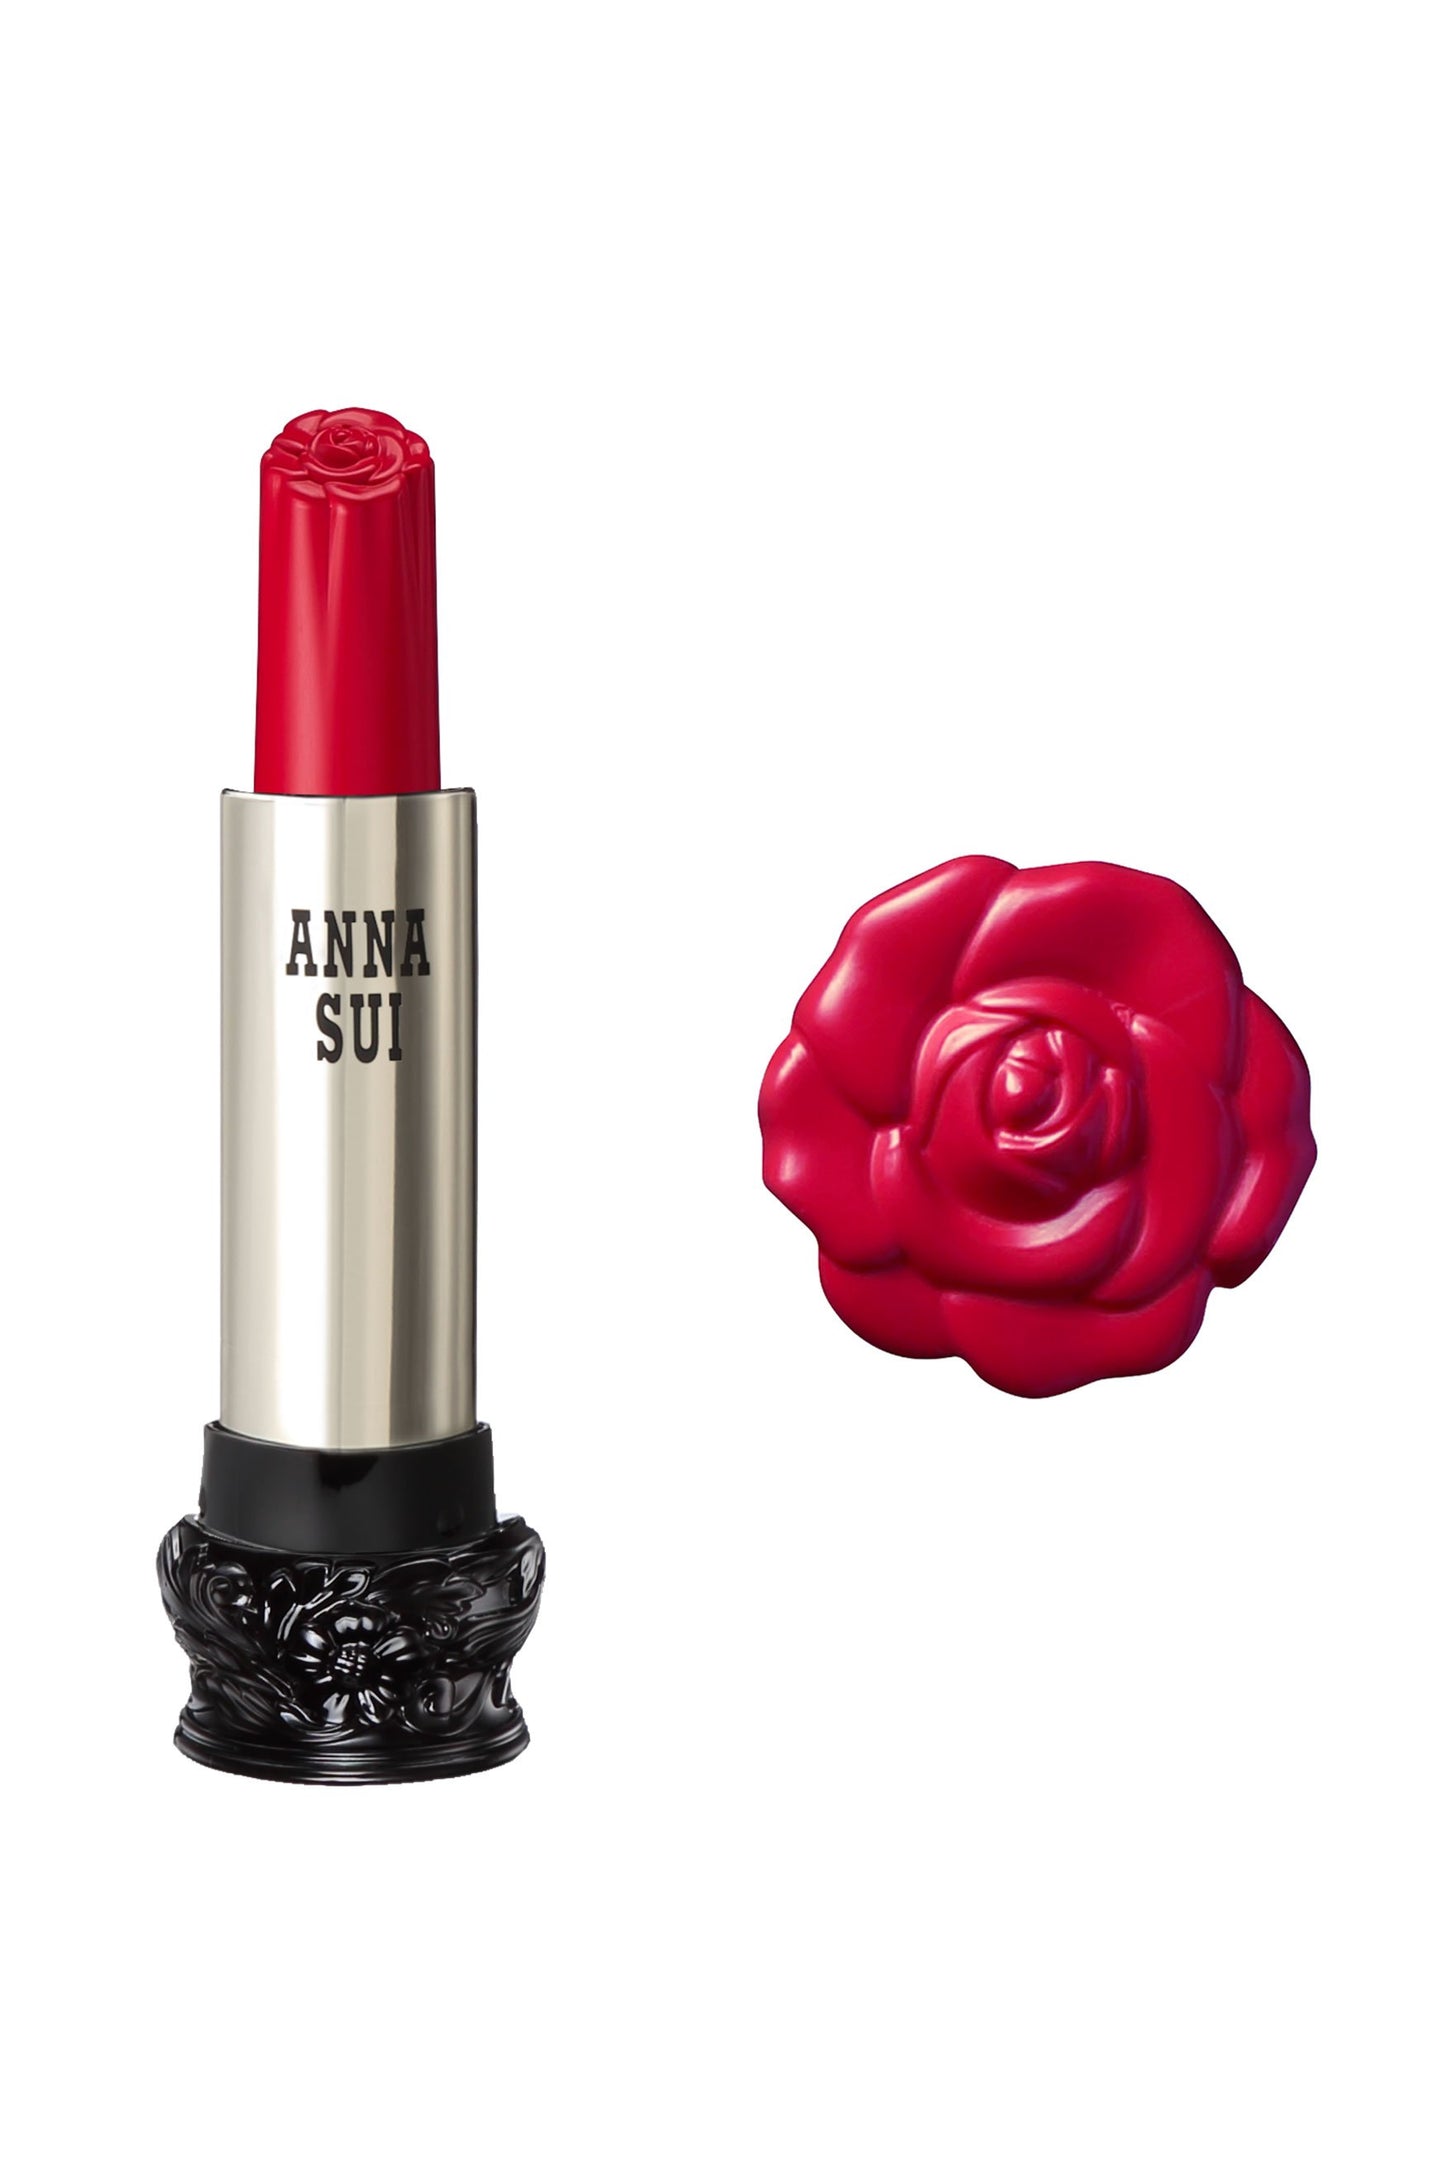 404 - Deep Red Rose, in cylindrical container, large black base, engraved floral design, metallic body